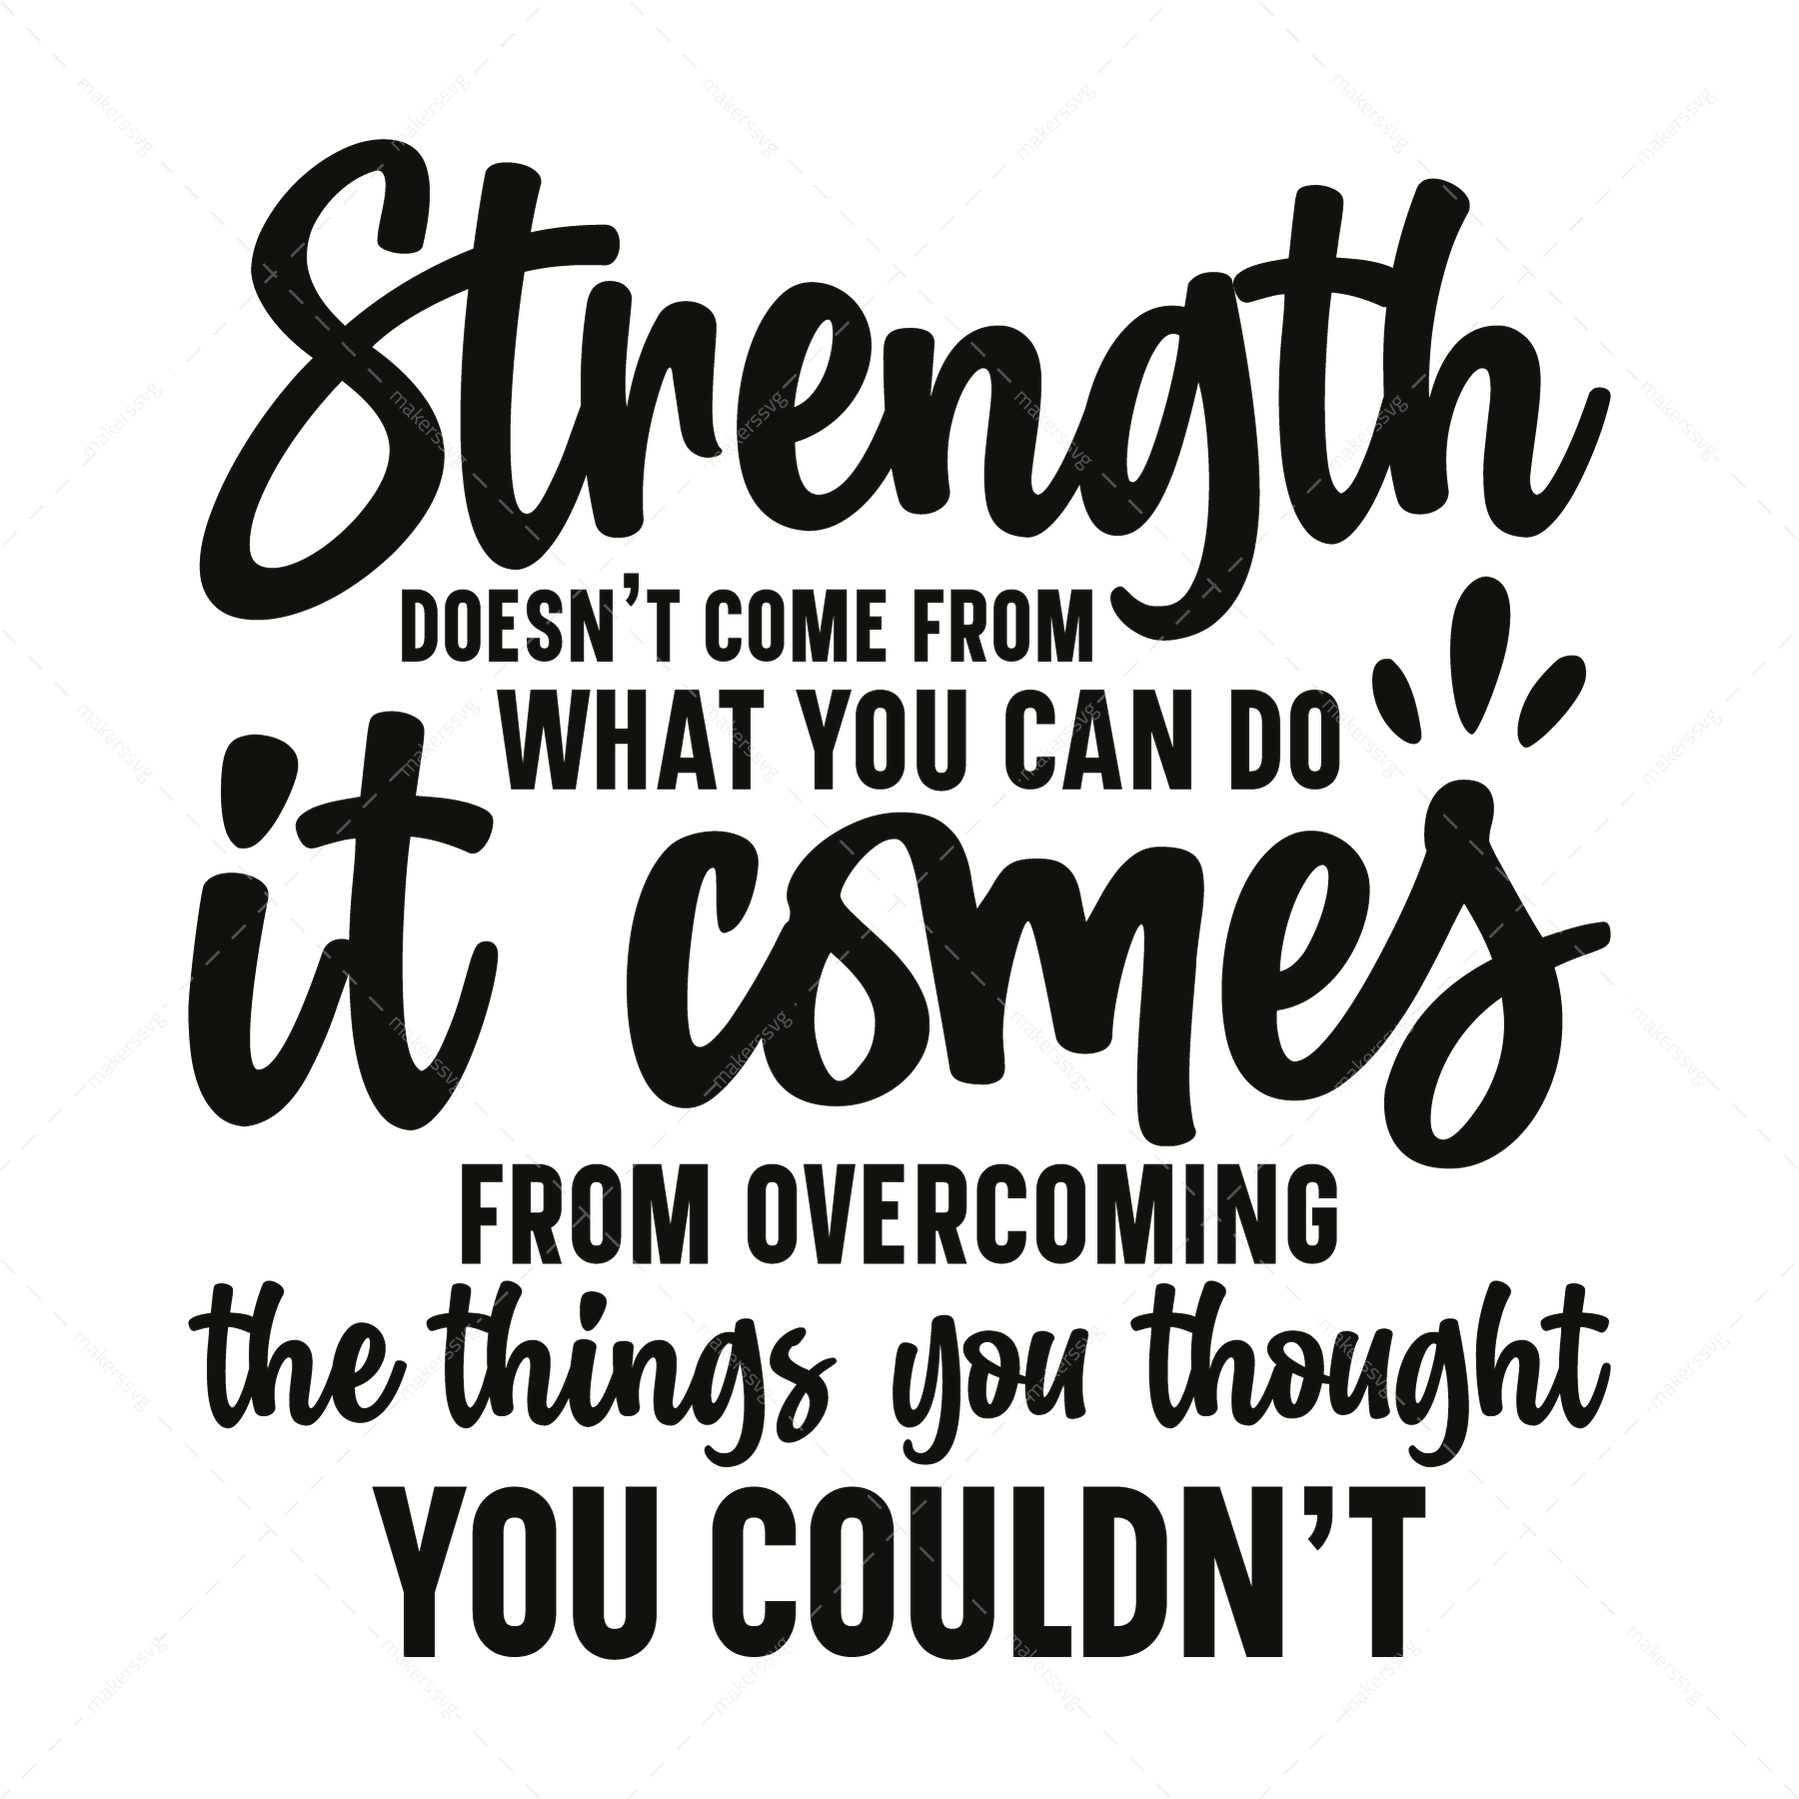 Fitness-Strengthdoesn_tcomefromwhatyoucando_itcomesfromovercomingthethingsyouthoughtyoucouldn_t-01-Makers SVG